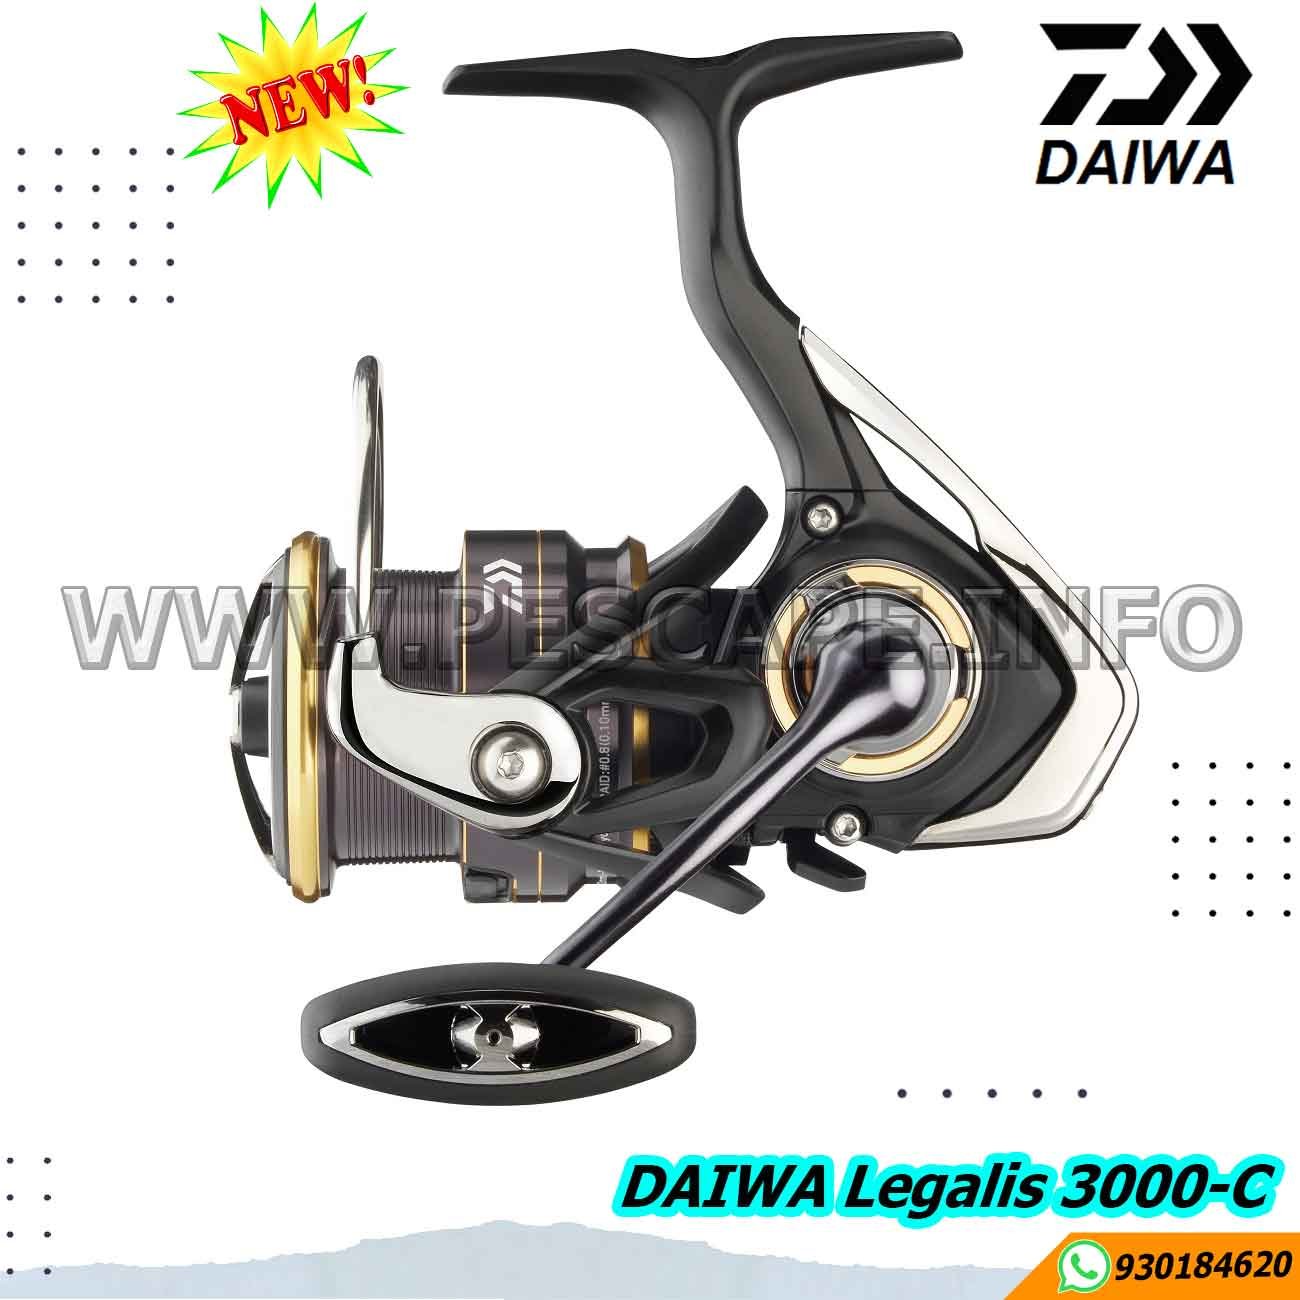 Carrete Daiwa Legalis LT Spinning Reel 3000-C, IND. PACK » PescaPe